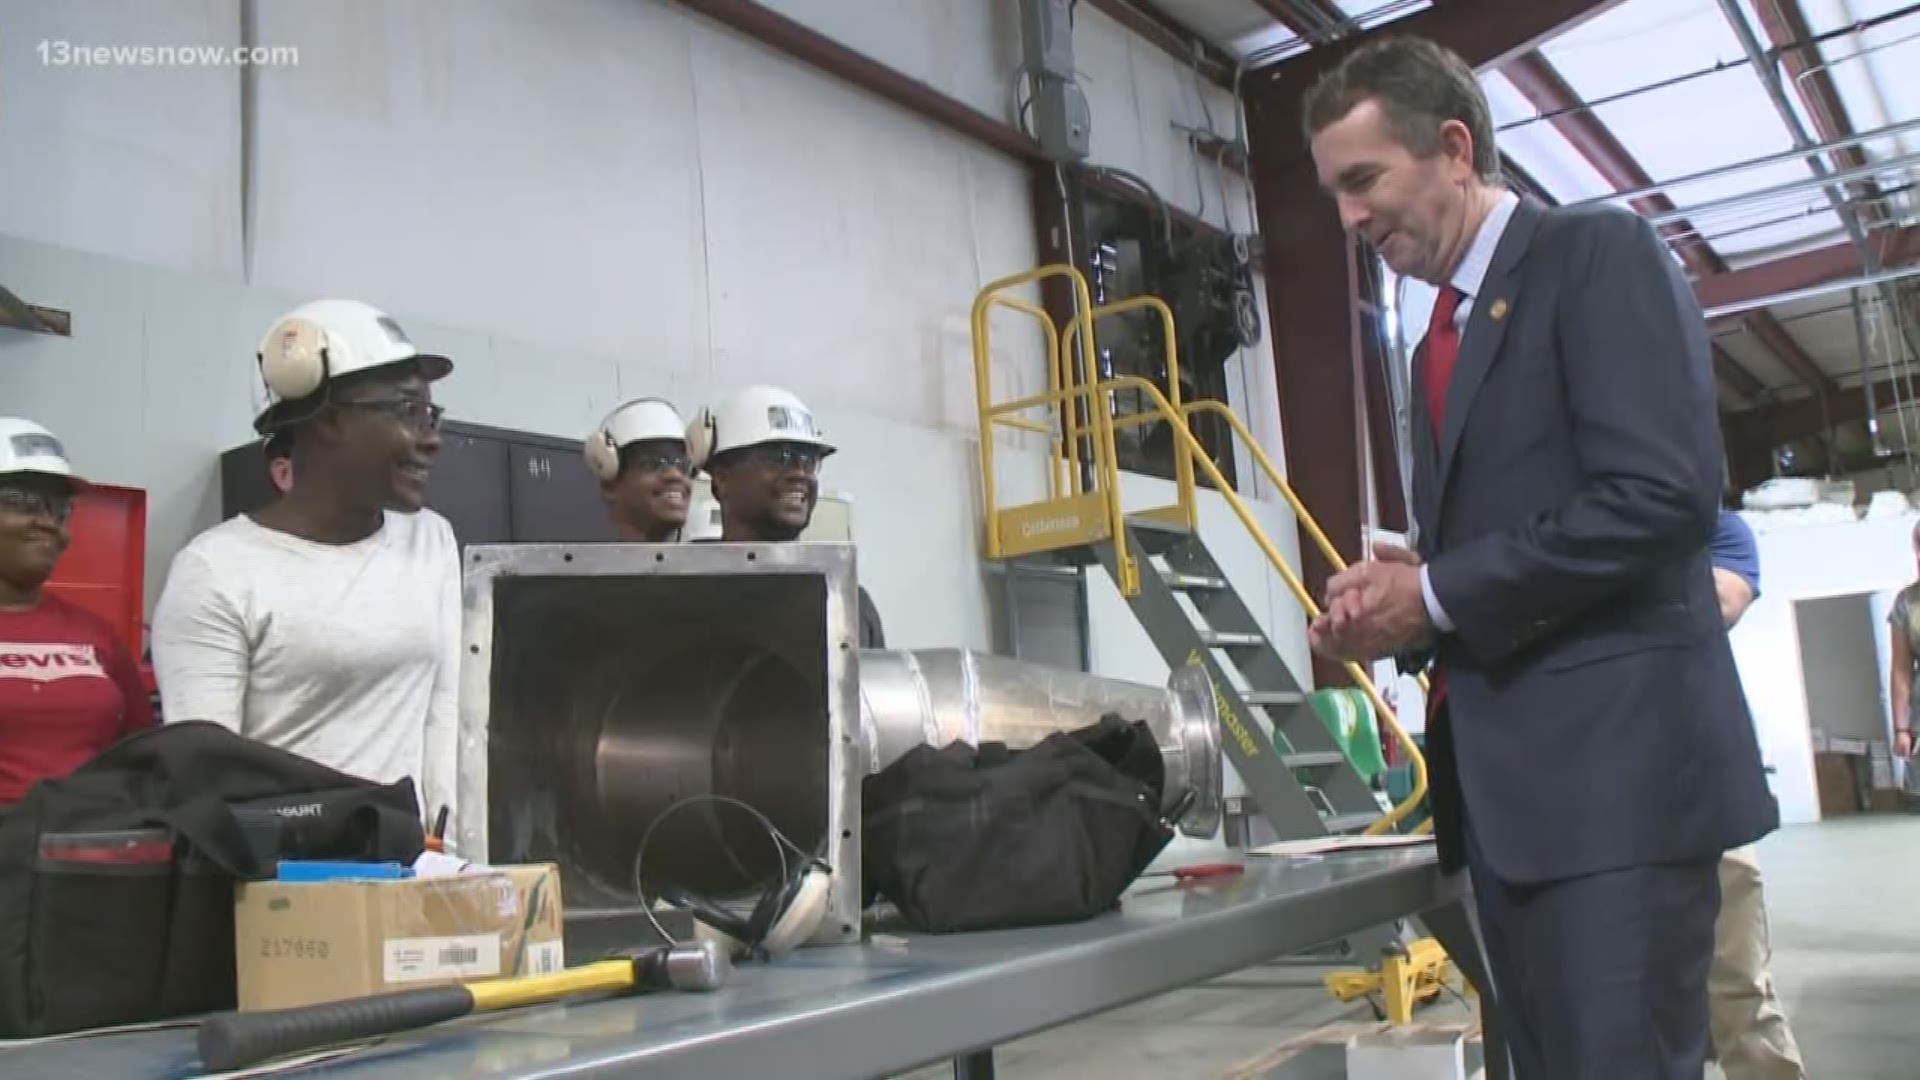 "It's really all about bringing skills to jobs, and we know that in order to have a job in the 21st century, you have to have the training for it," said Northam.